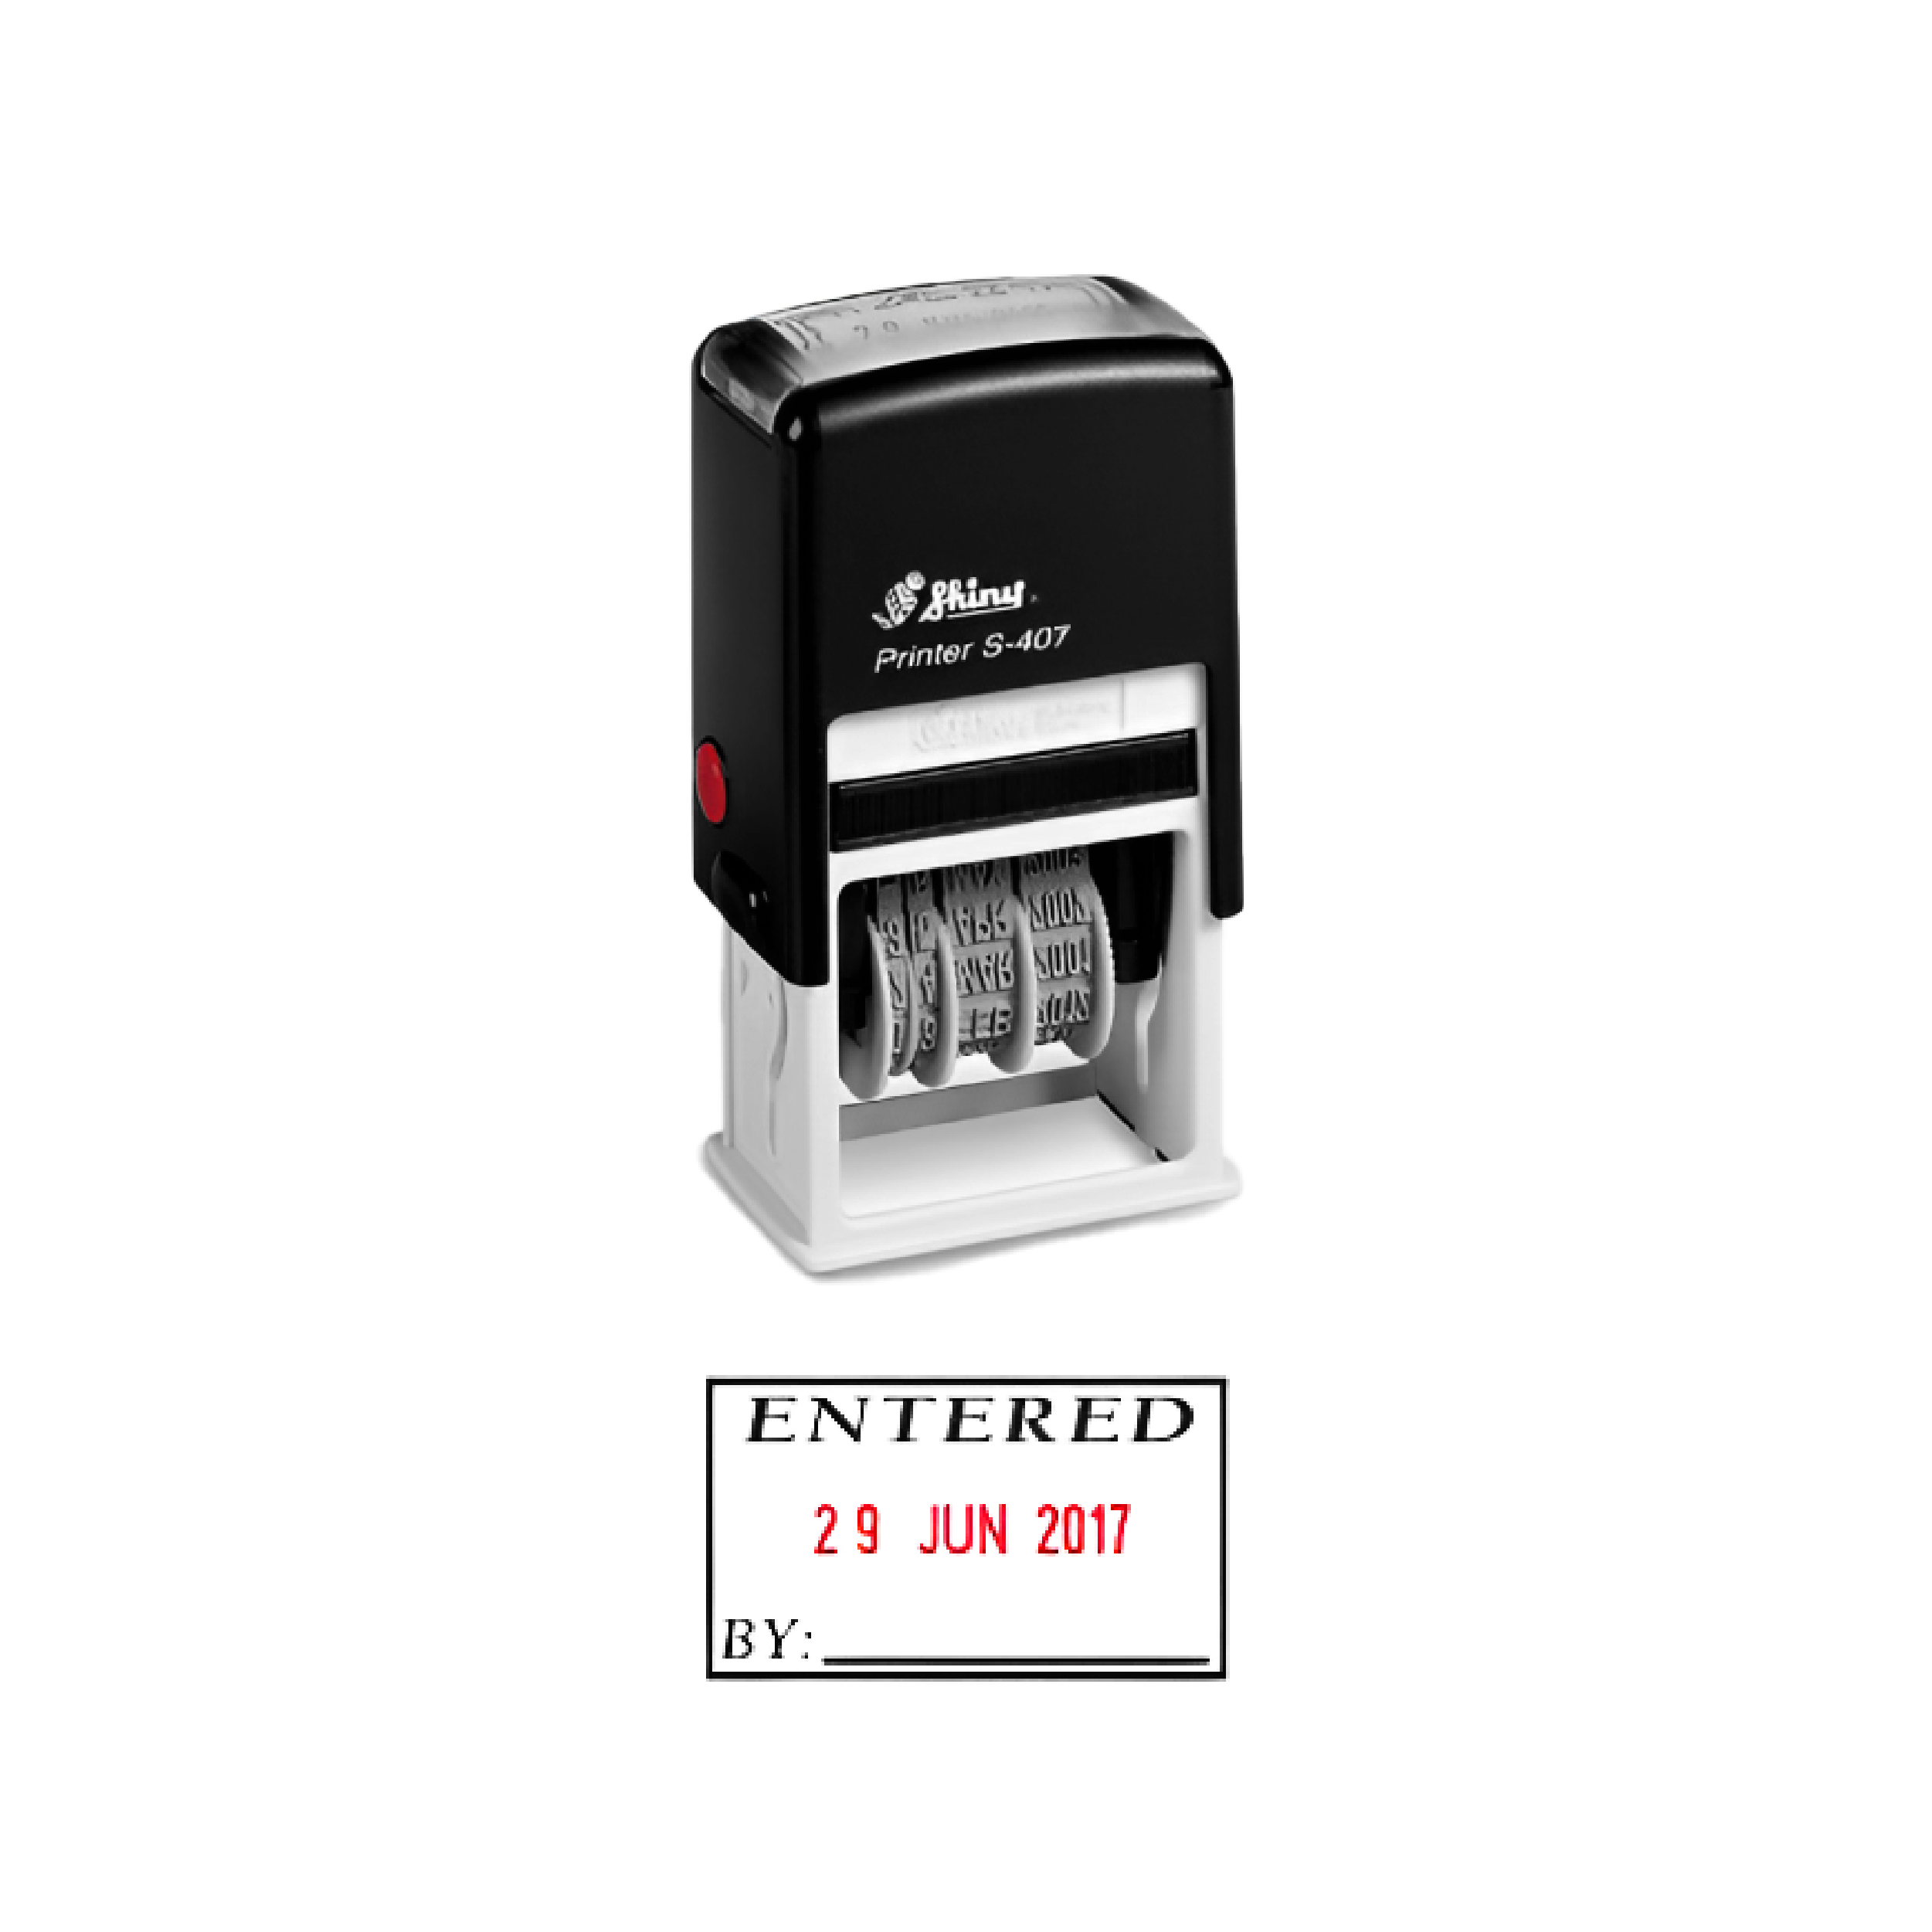 Shiny Self-Inking Date Stamp, ENTERED (S-407)